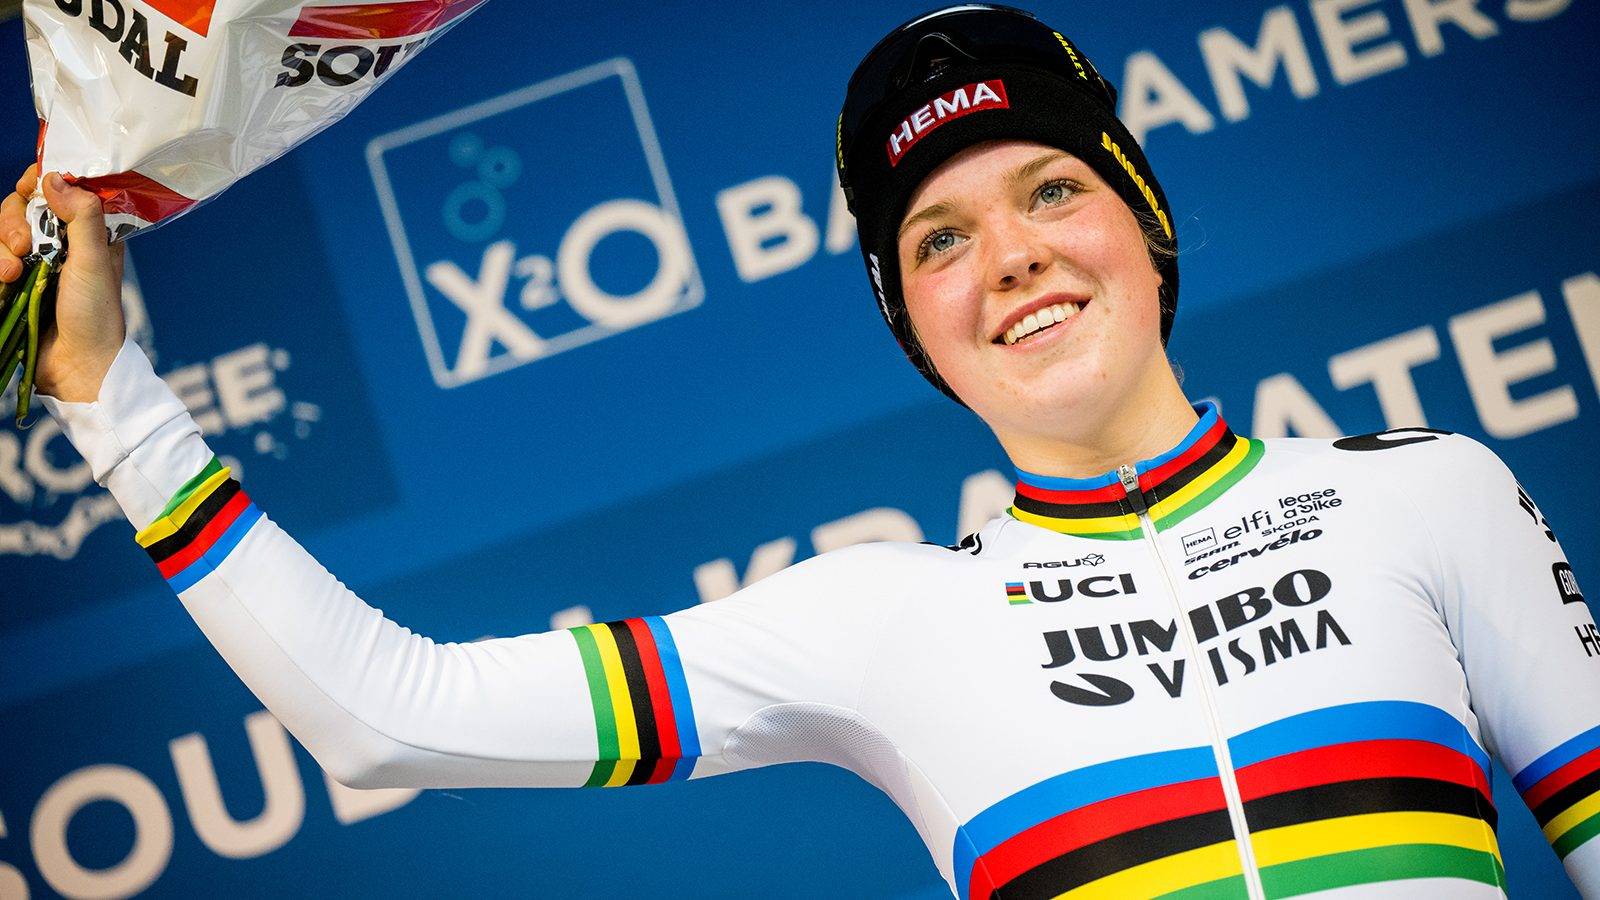 Dutch Fem Van Empel pictured on the podium after the women's elite race of the Krawatencross cyclocross, the seventh stage (out of 8) in the Trofee Veldrijden competition, in Lille, Belgium, Sunday 12 February 2023. BELGA PHOTO JASPER JACOBS